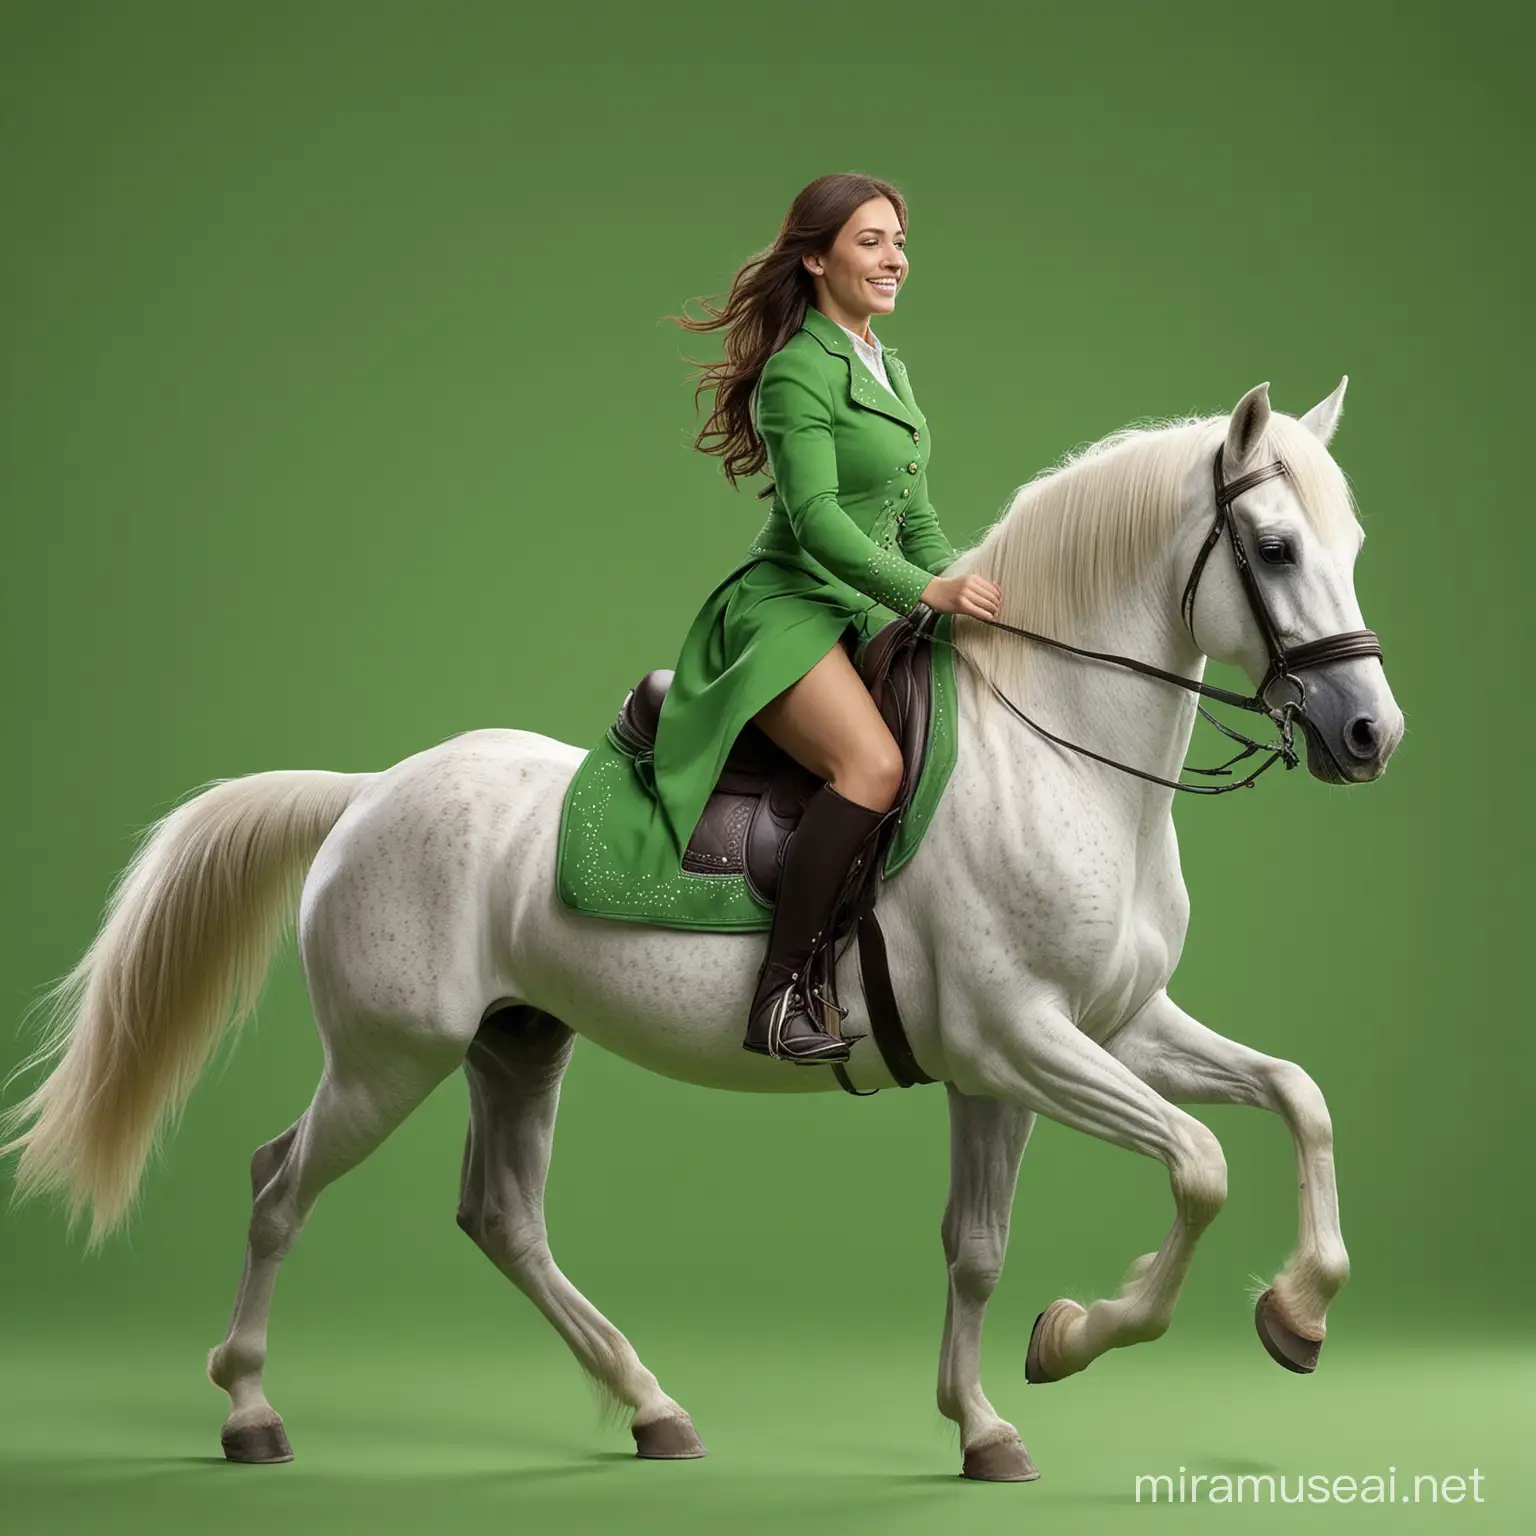 A very beautiful realistic strong horse, class woman riding and smiling. very feminine, very detailed and real. green screen BACKGROUND for chromakey.  realistic. full body. DIAMONDS. LOVE. LOVE. LOVE. MAGICal. SPIRITUAL. HEAVEN LIGHTS.